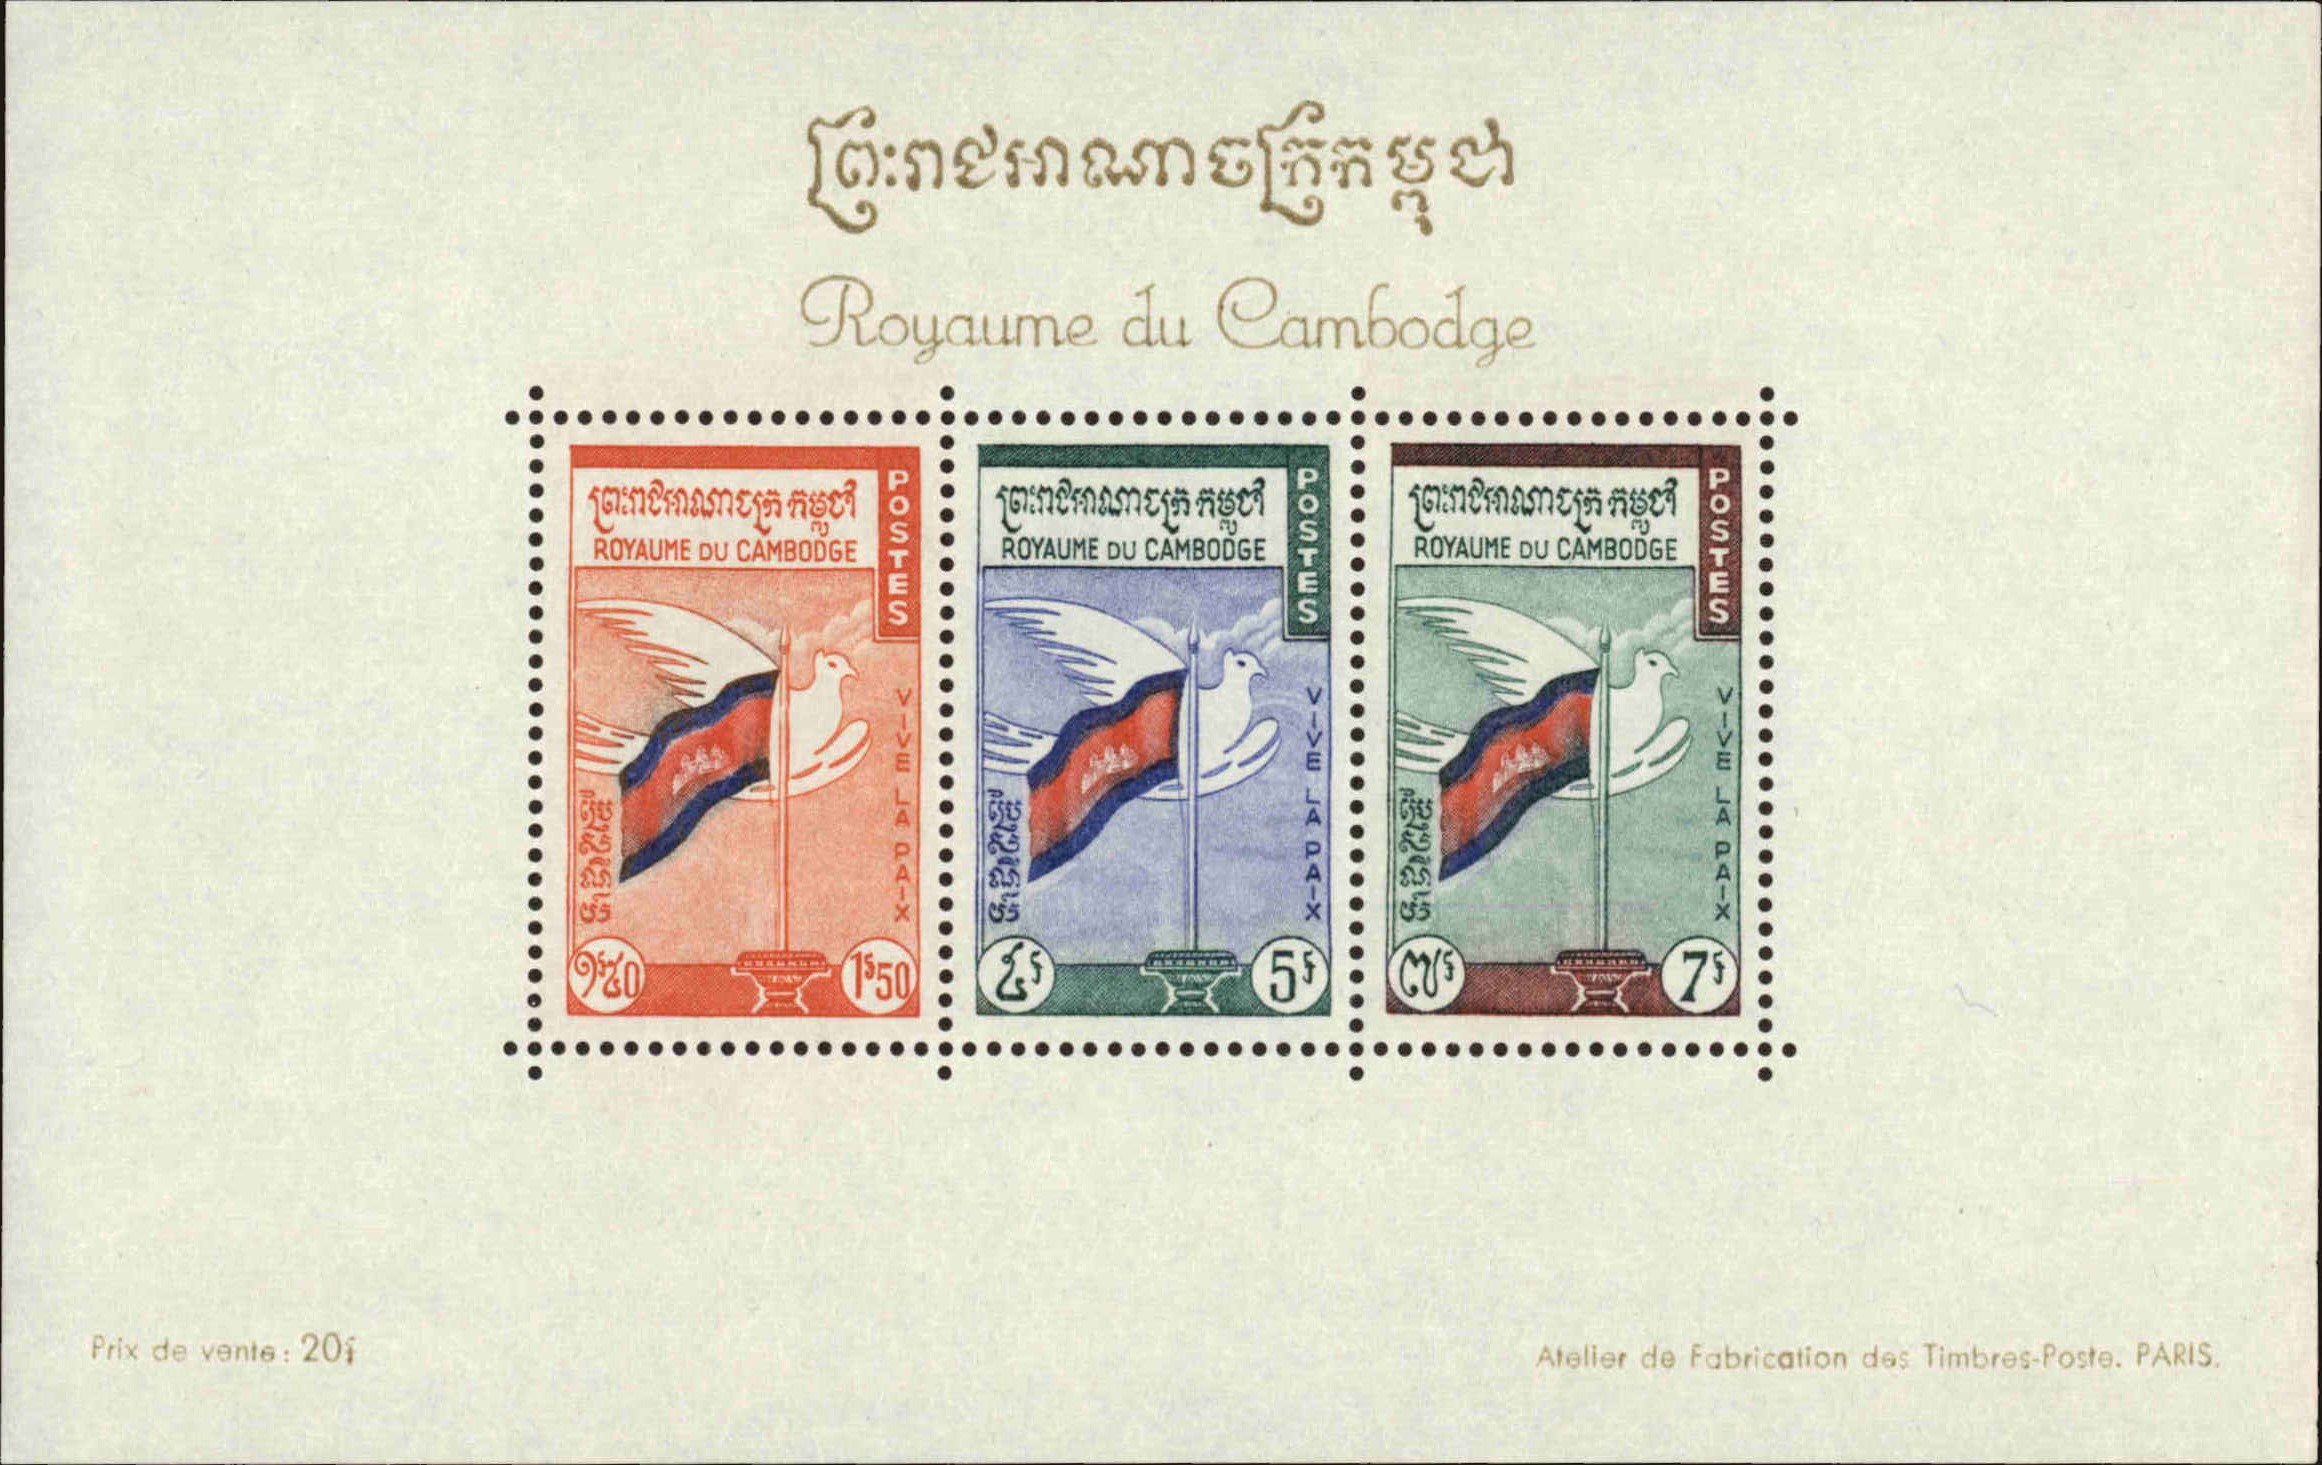 Front view of Cambodia 90b collectors stamp